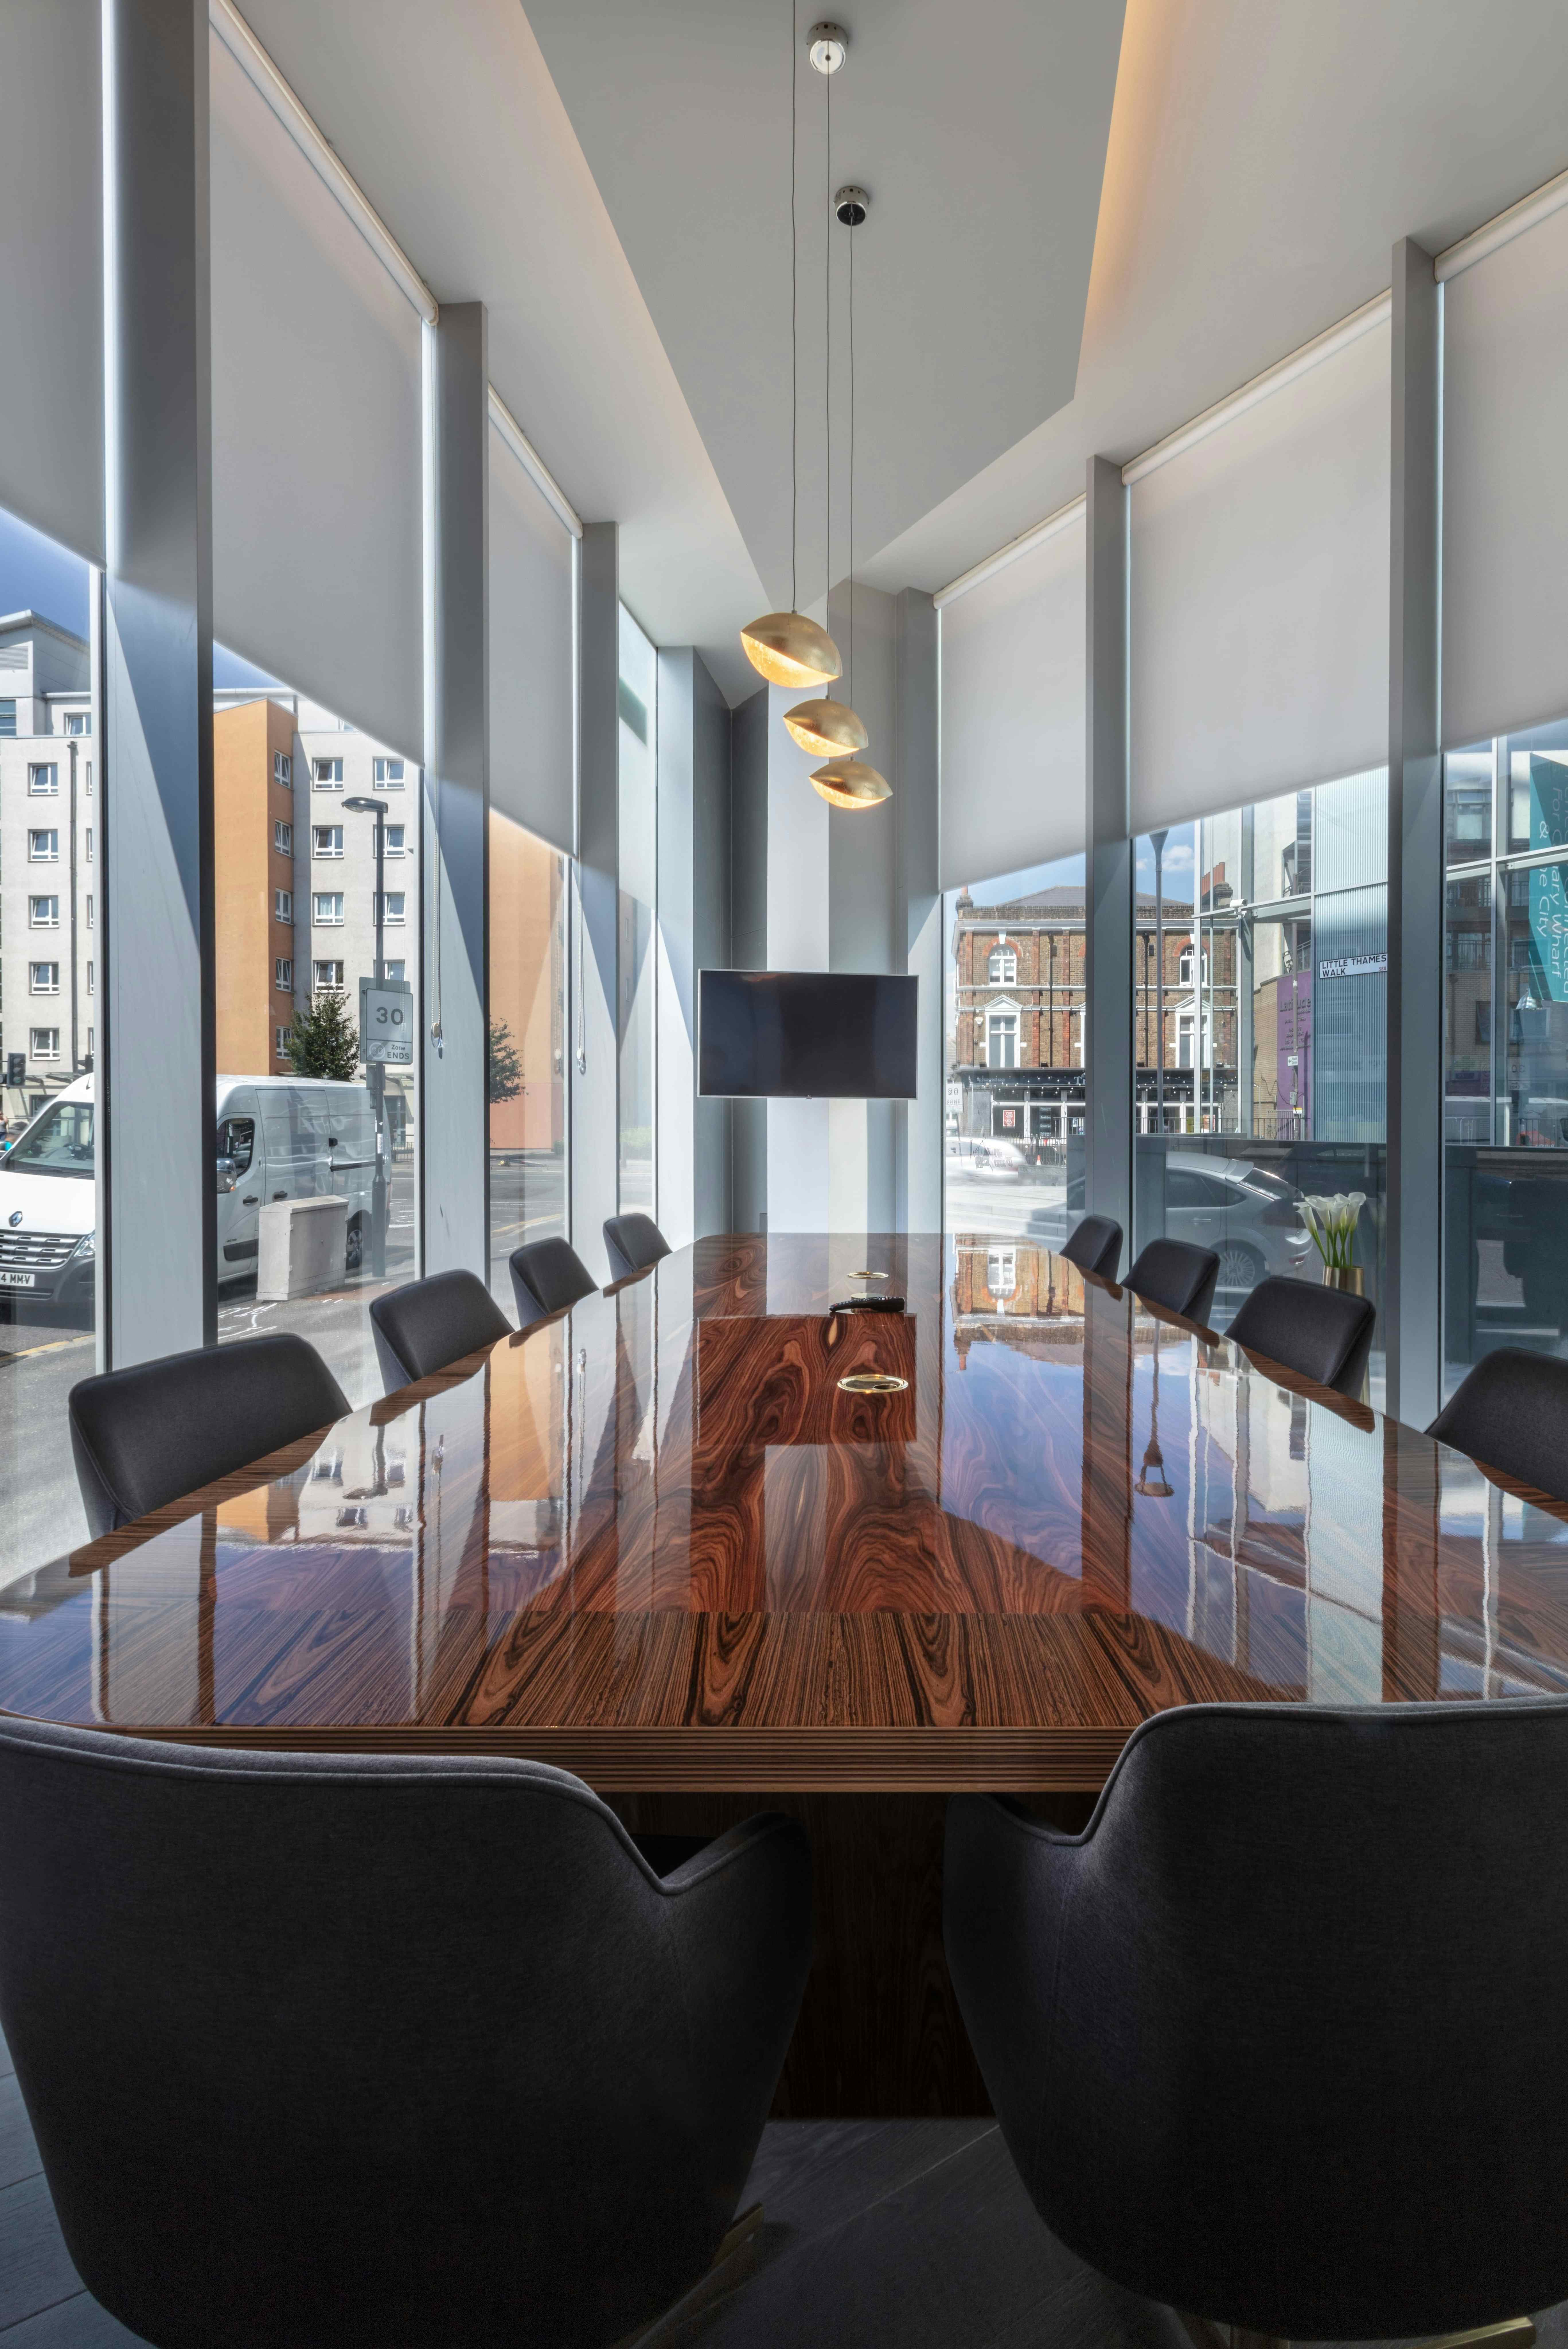 Meeting Room, Conference Room, Boardroom, Urbanist Architecture 